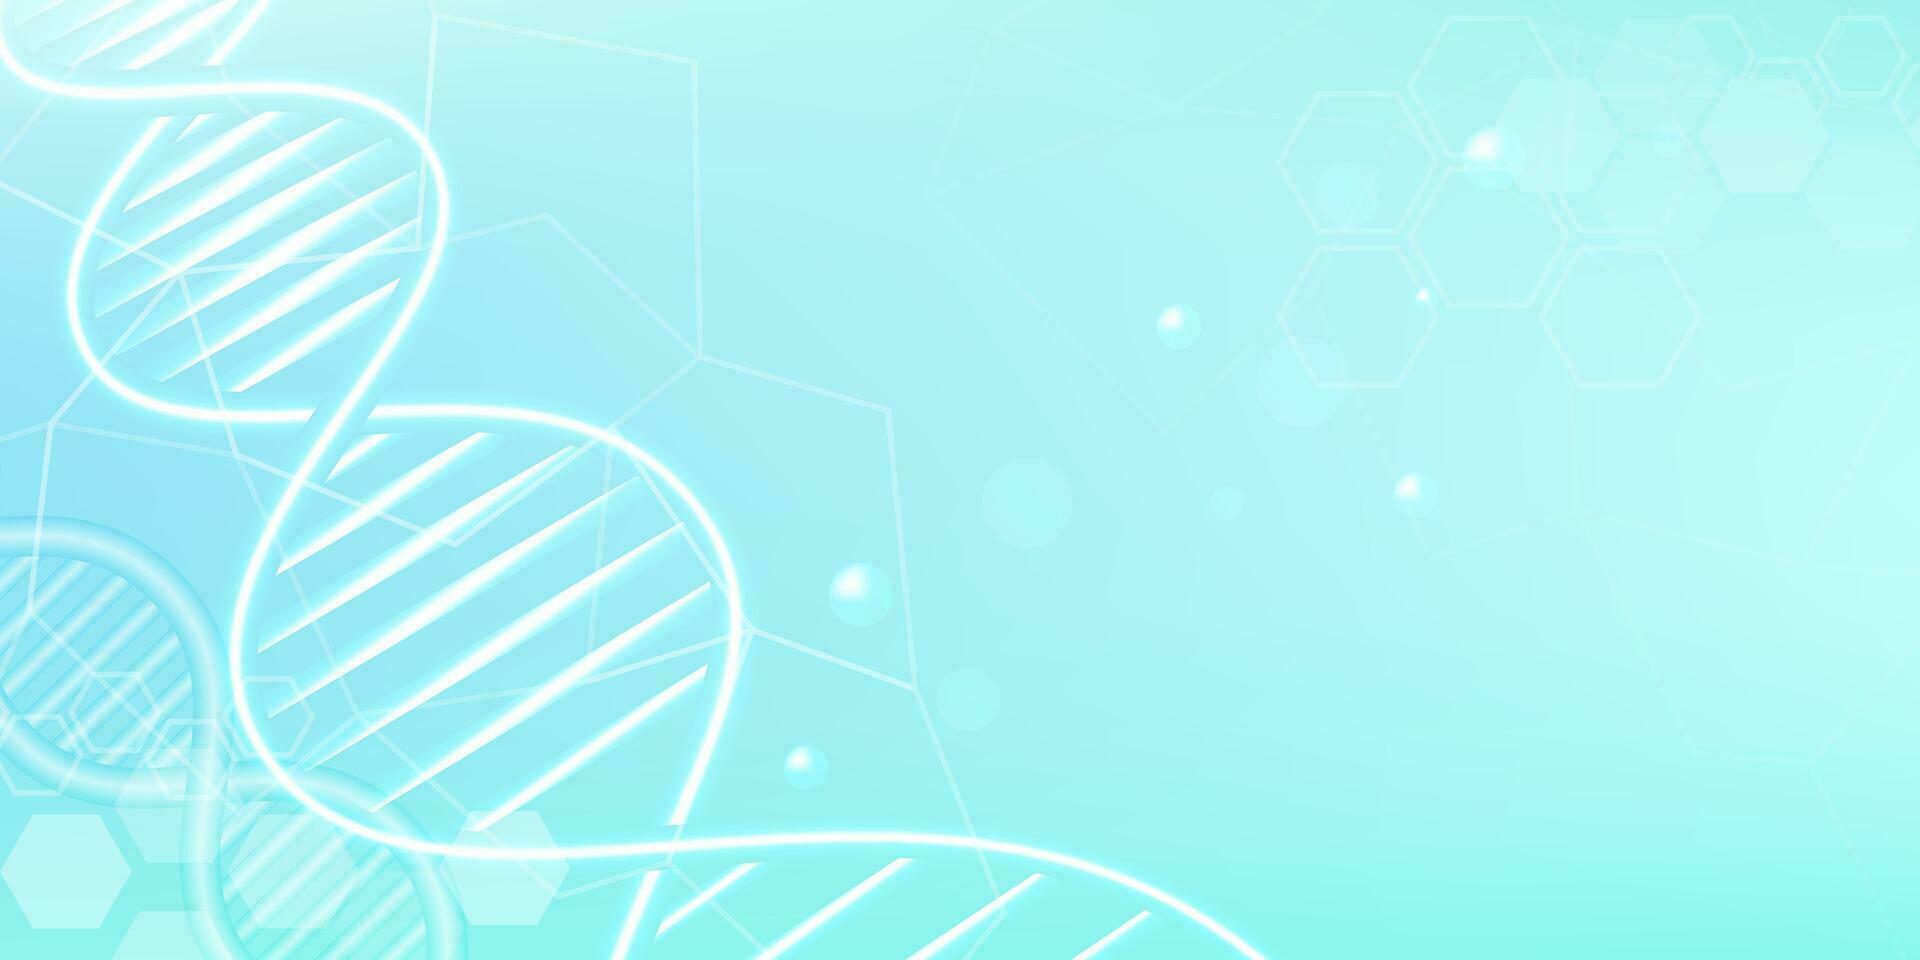 Abstract DNA structure biotechnology design concept with hexagonal texture in blue background. vector